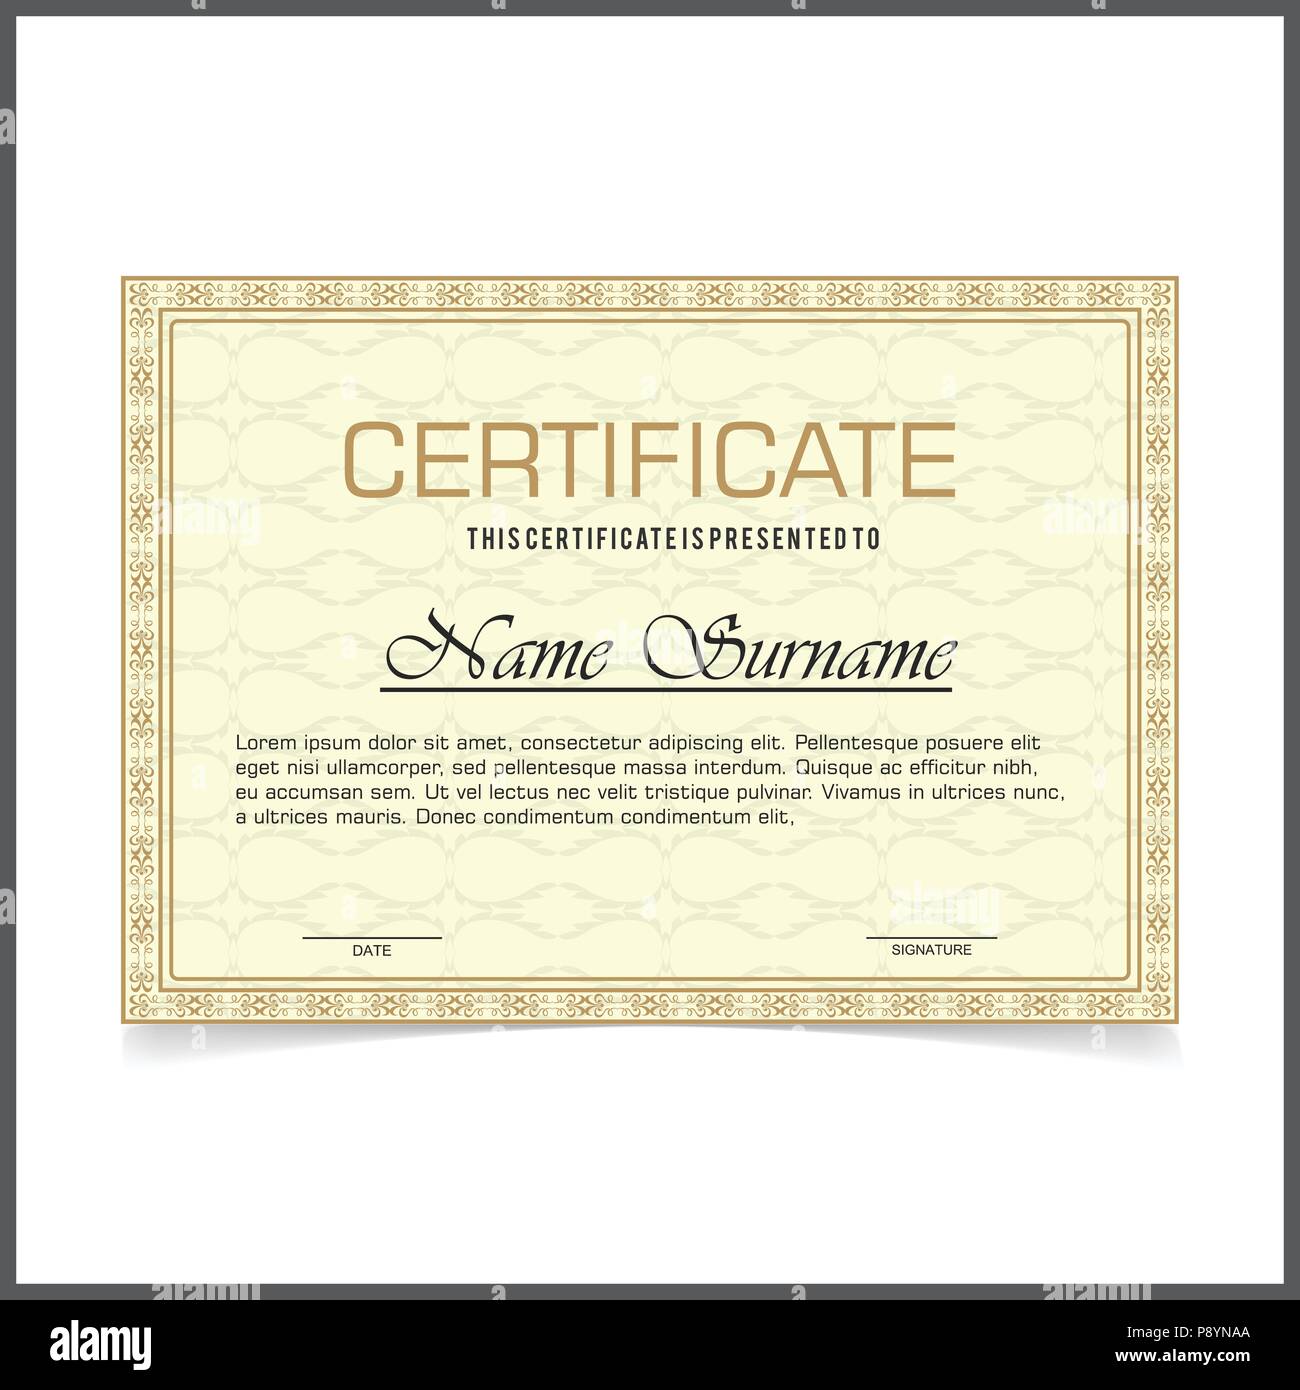 Vector Certificate Template With Yellow Designe Borders On Pale Yellow Card For Web Design And Application Interface Also Useful For Infographics Stock Vector Image Art Alamy,Plastic Emulsion Paint Price In Delhi